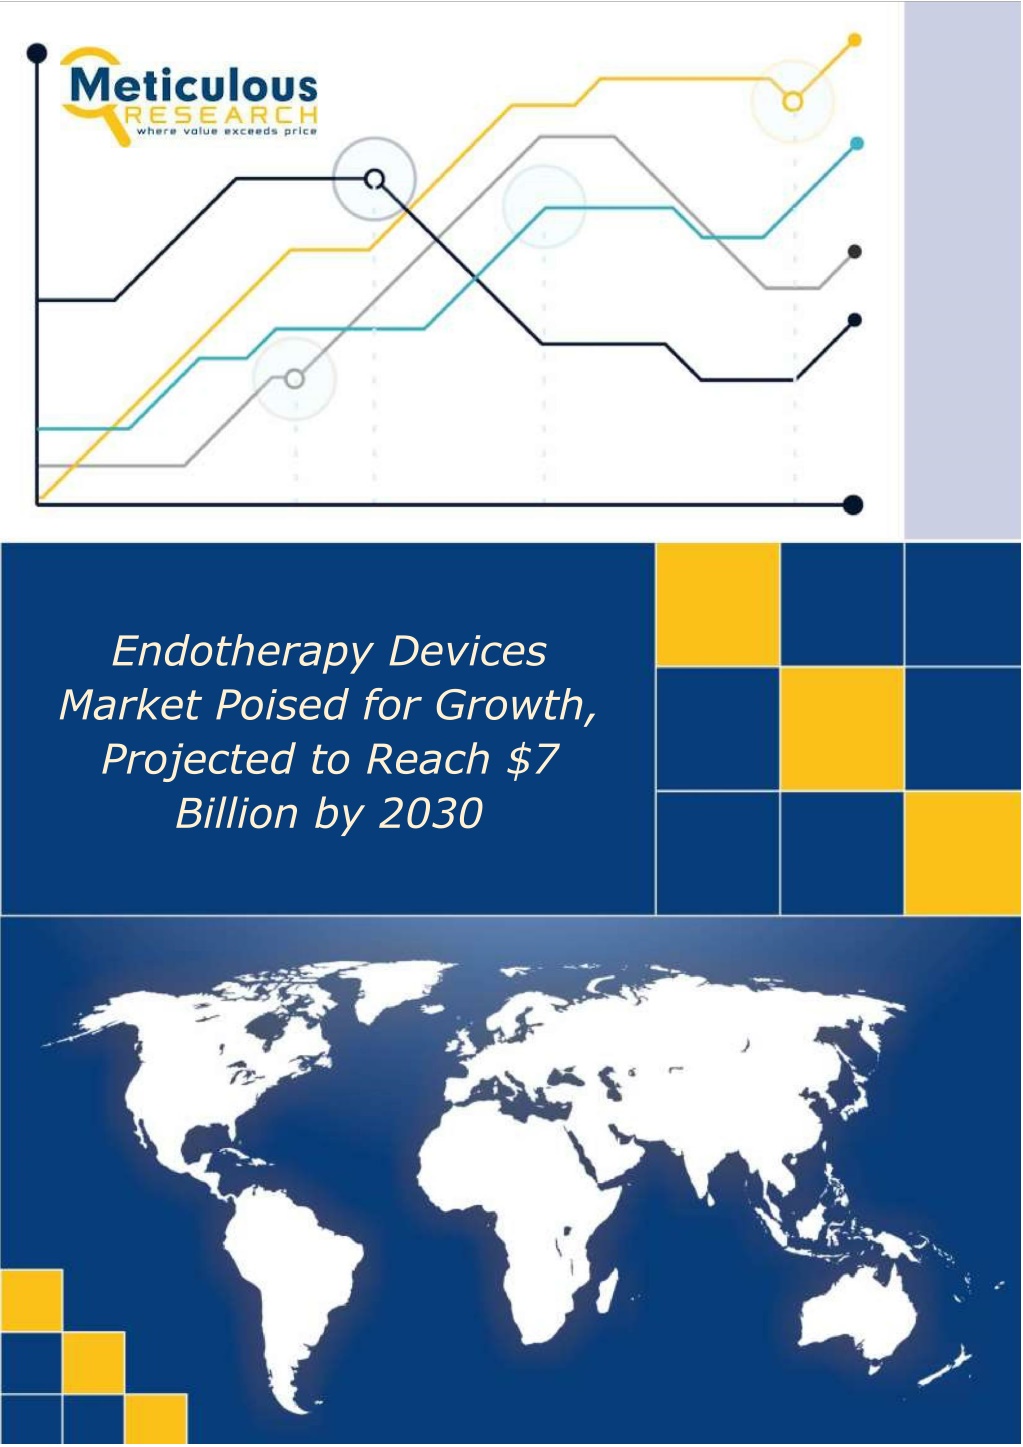 endotherapy devices market poised for growth l.w